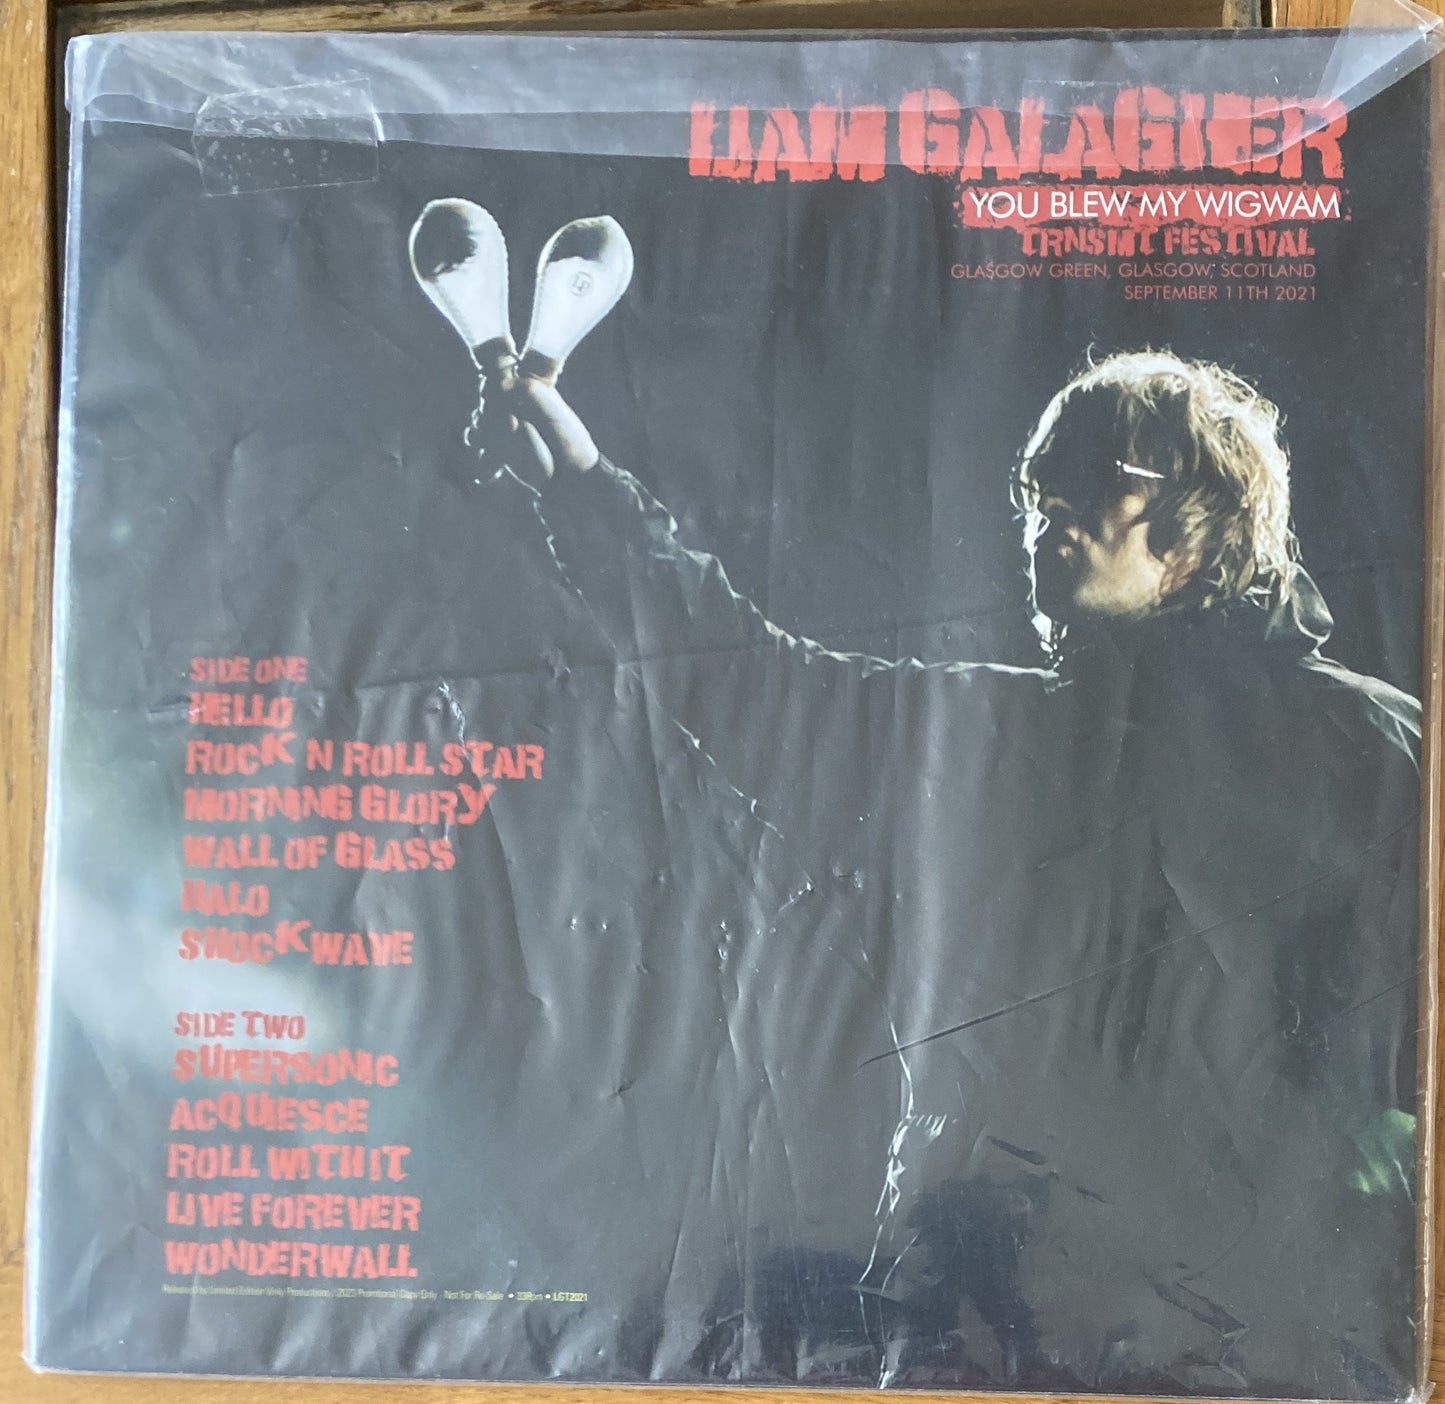 The back of 'Liam Gallagher - You Blew My Wigwam' on vinyl